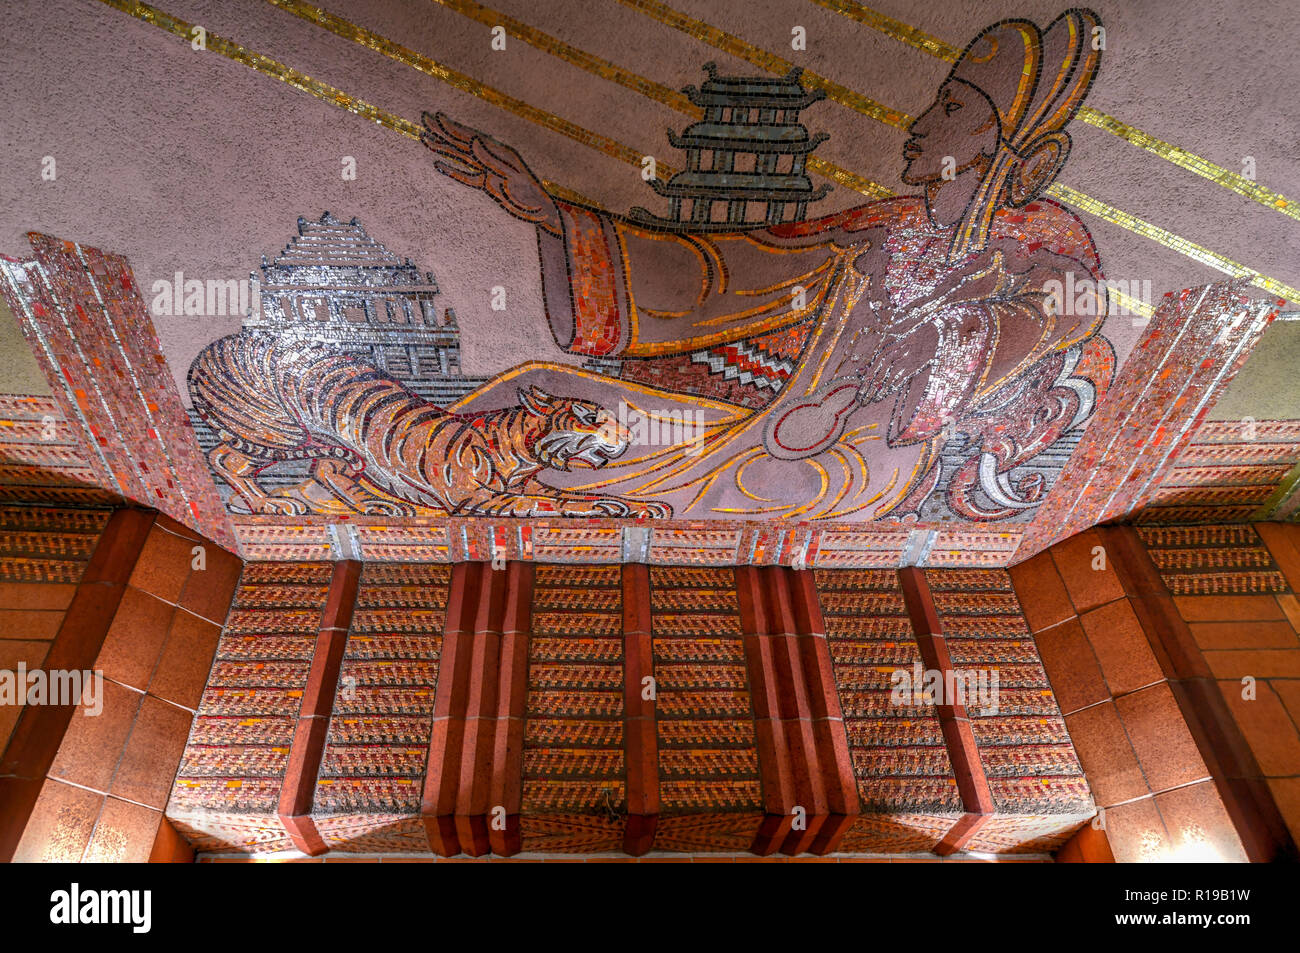 New York City - October 14, 2018: Art Deco mural in the AT&T Long Distance Building. It is a 27-story landmarked Art Deco skyscraper located in the Tr Stock Photo